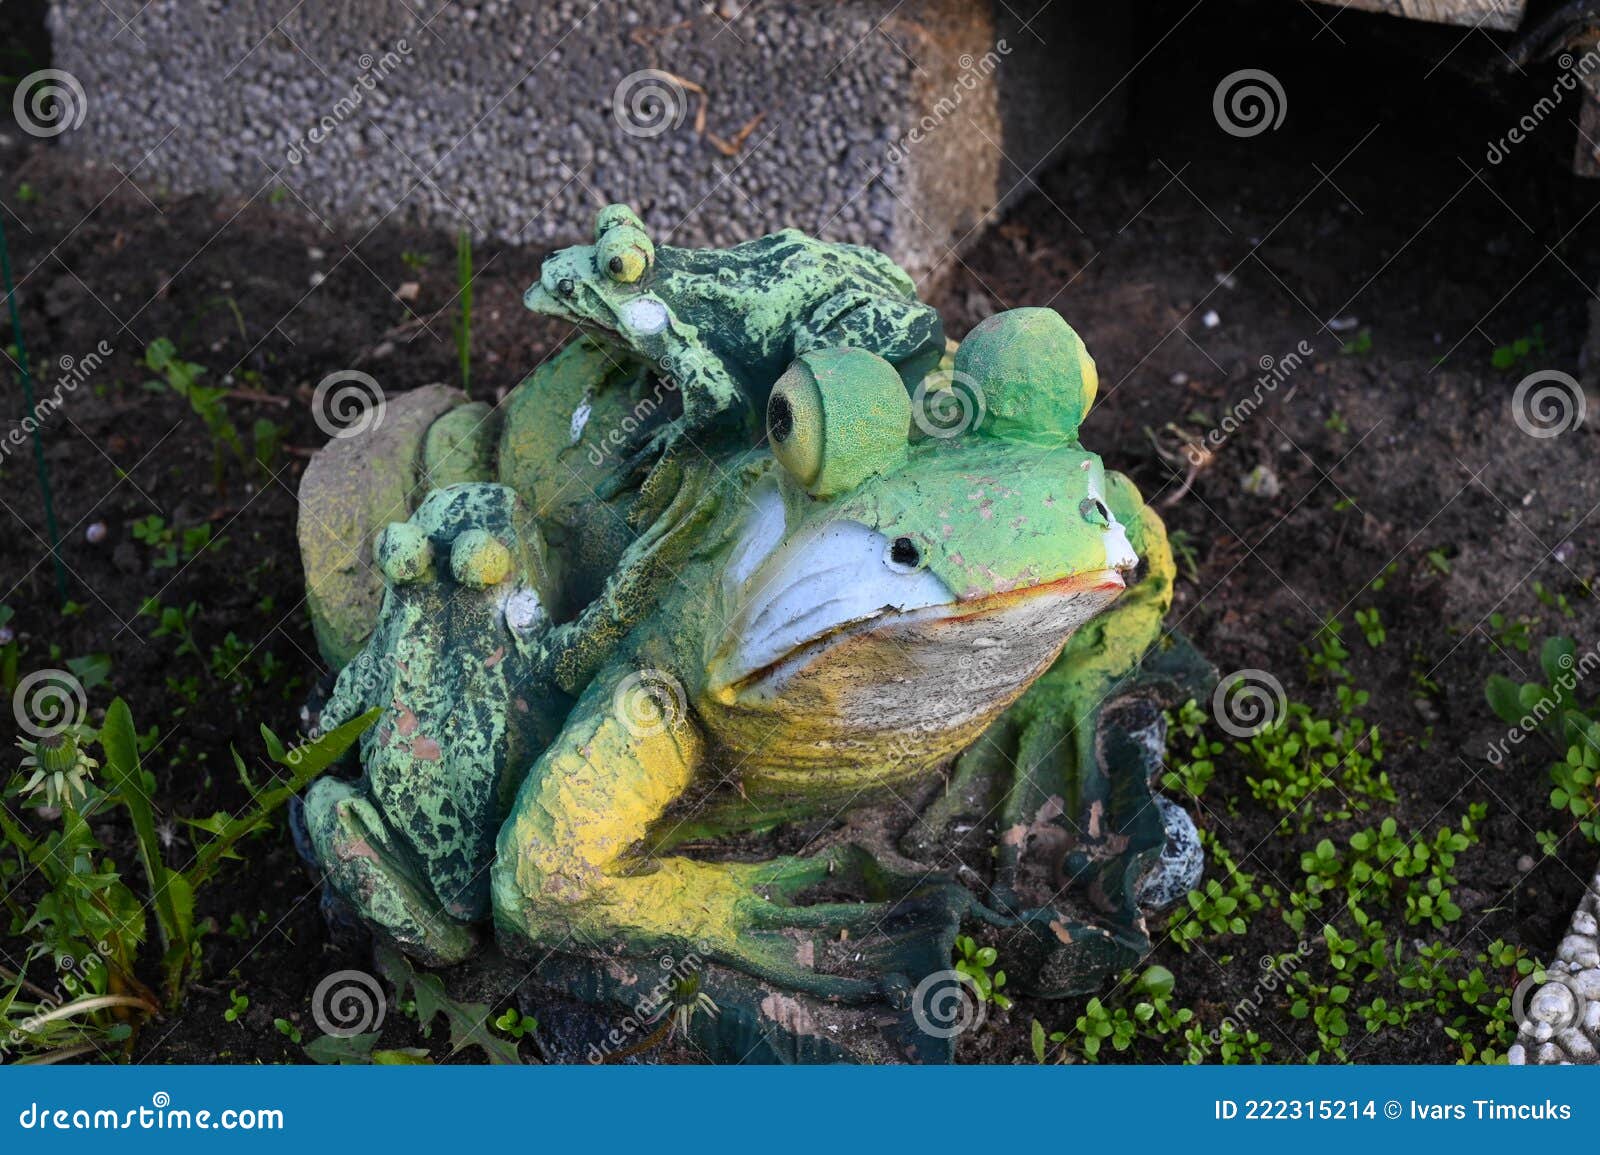 A Garden Figure Depicting a Frog Editorial Stock Image - Image of